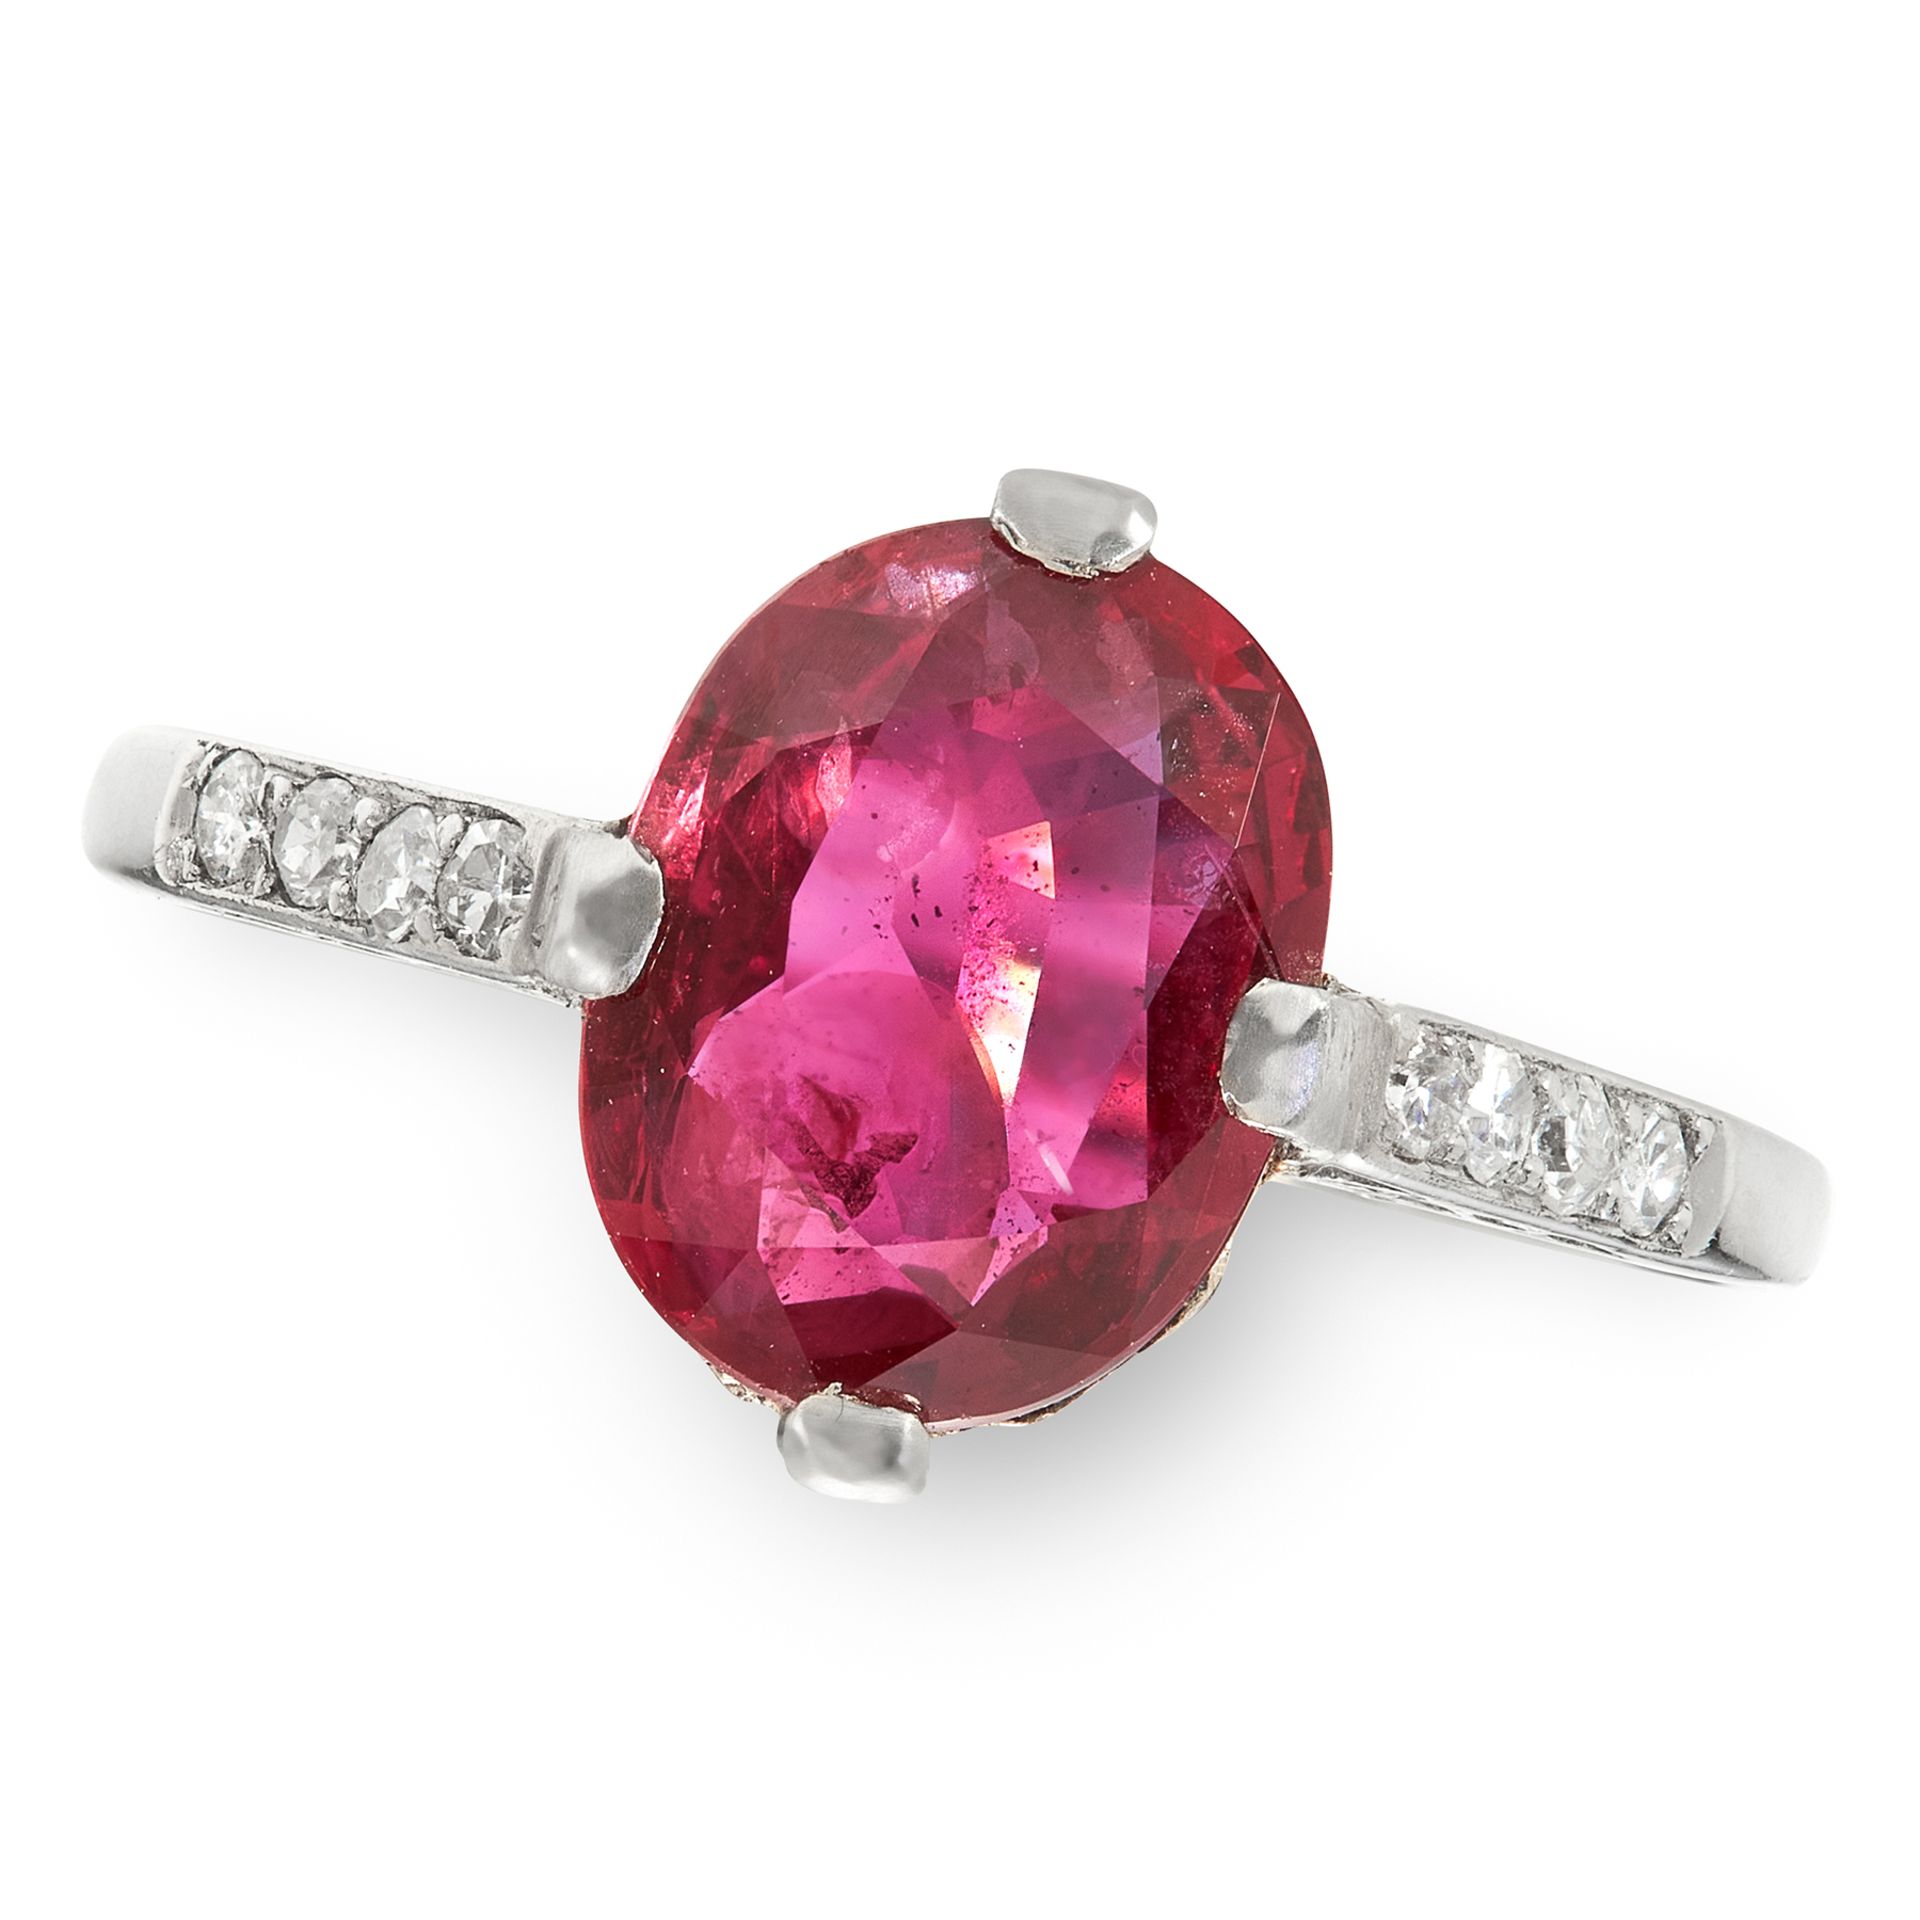 A 2.33 CARAT RUBY AND DIAMOND RING in platinum, set with an oval cut ruby of 2.33 carats with